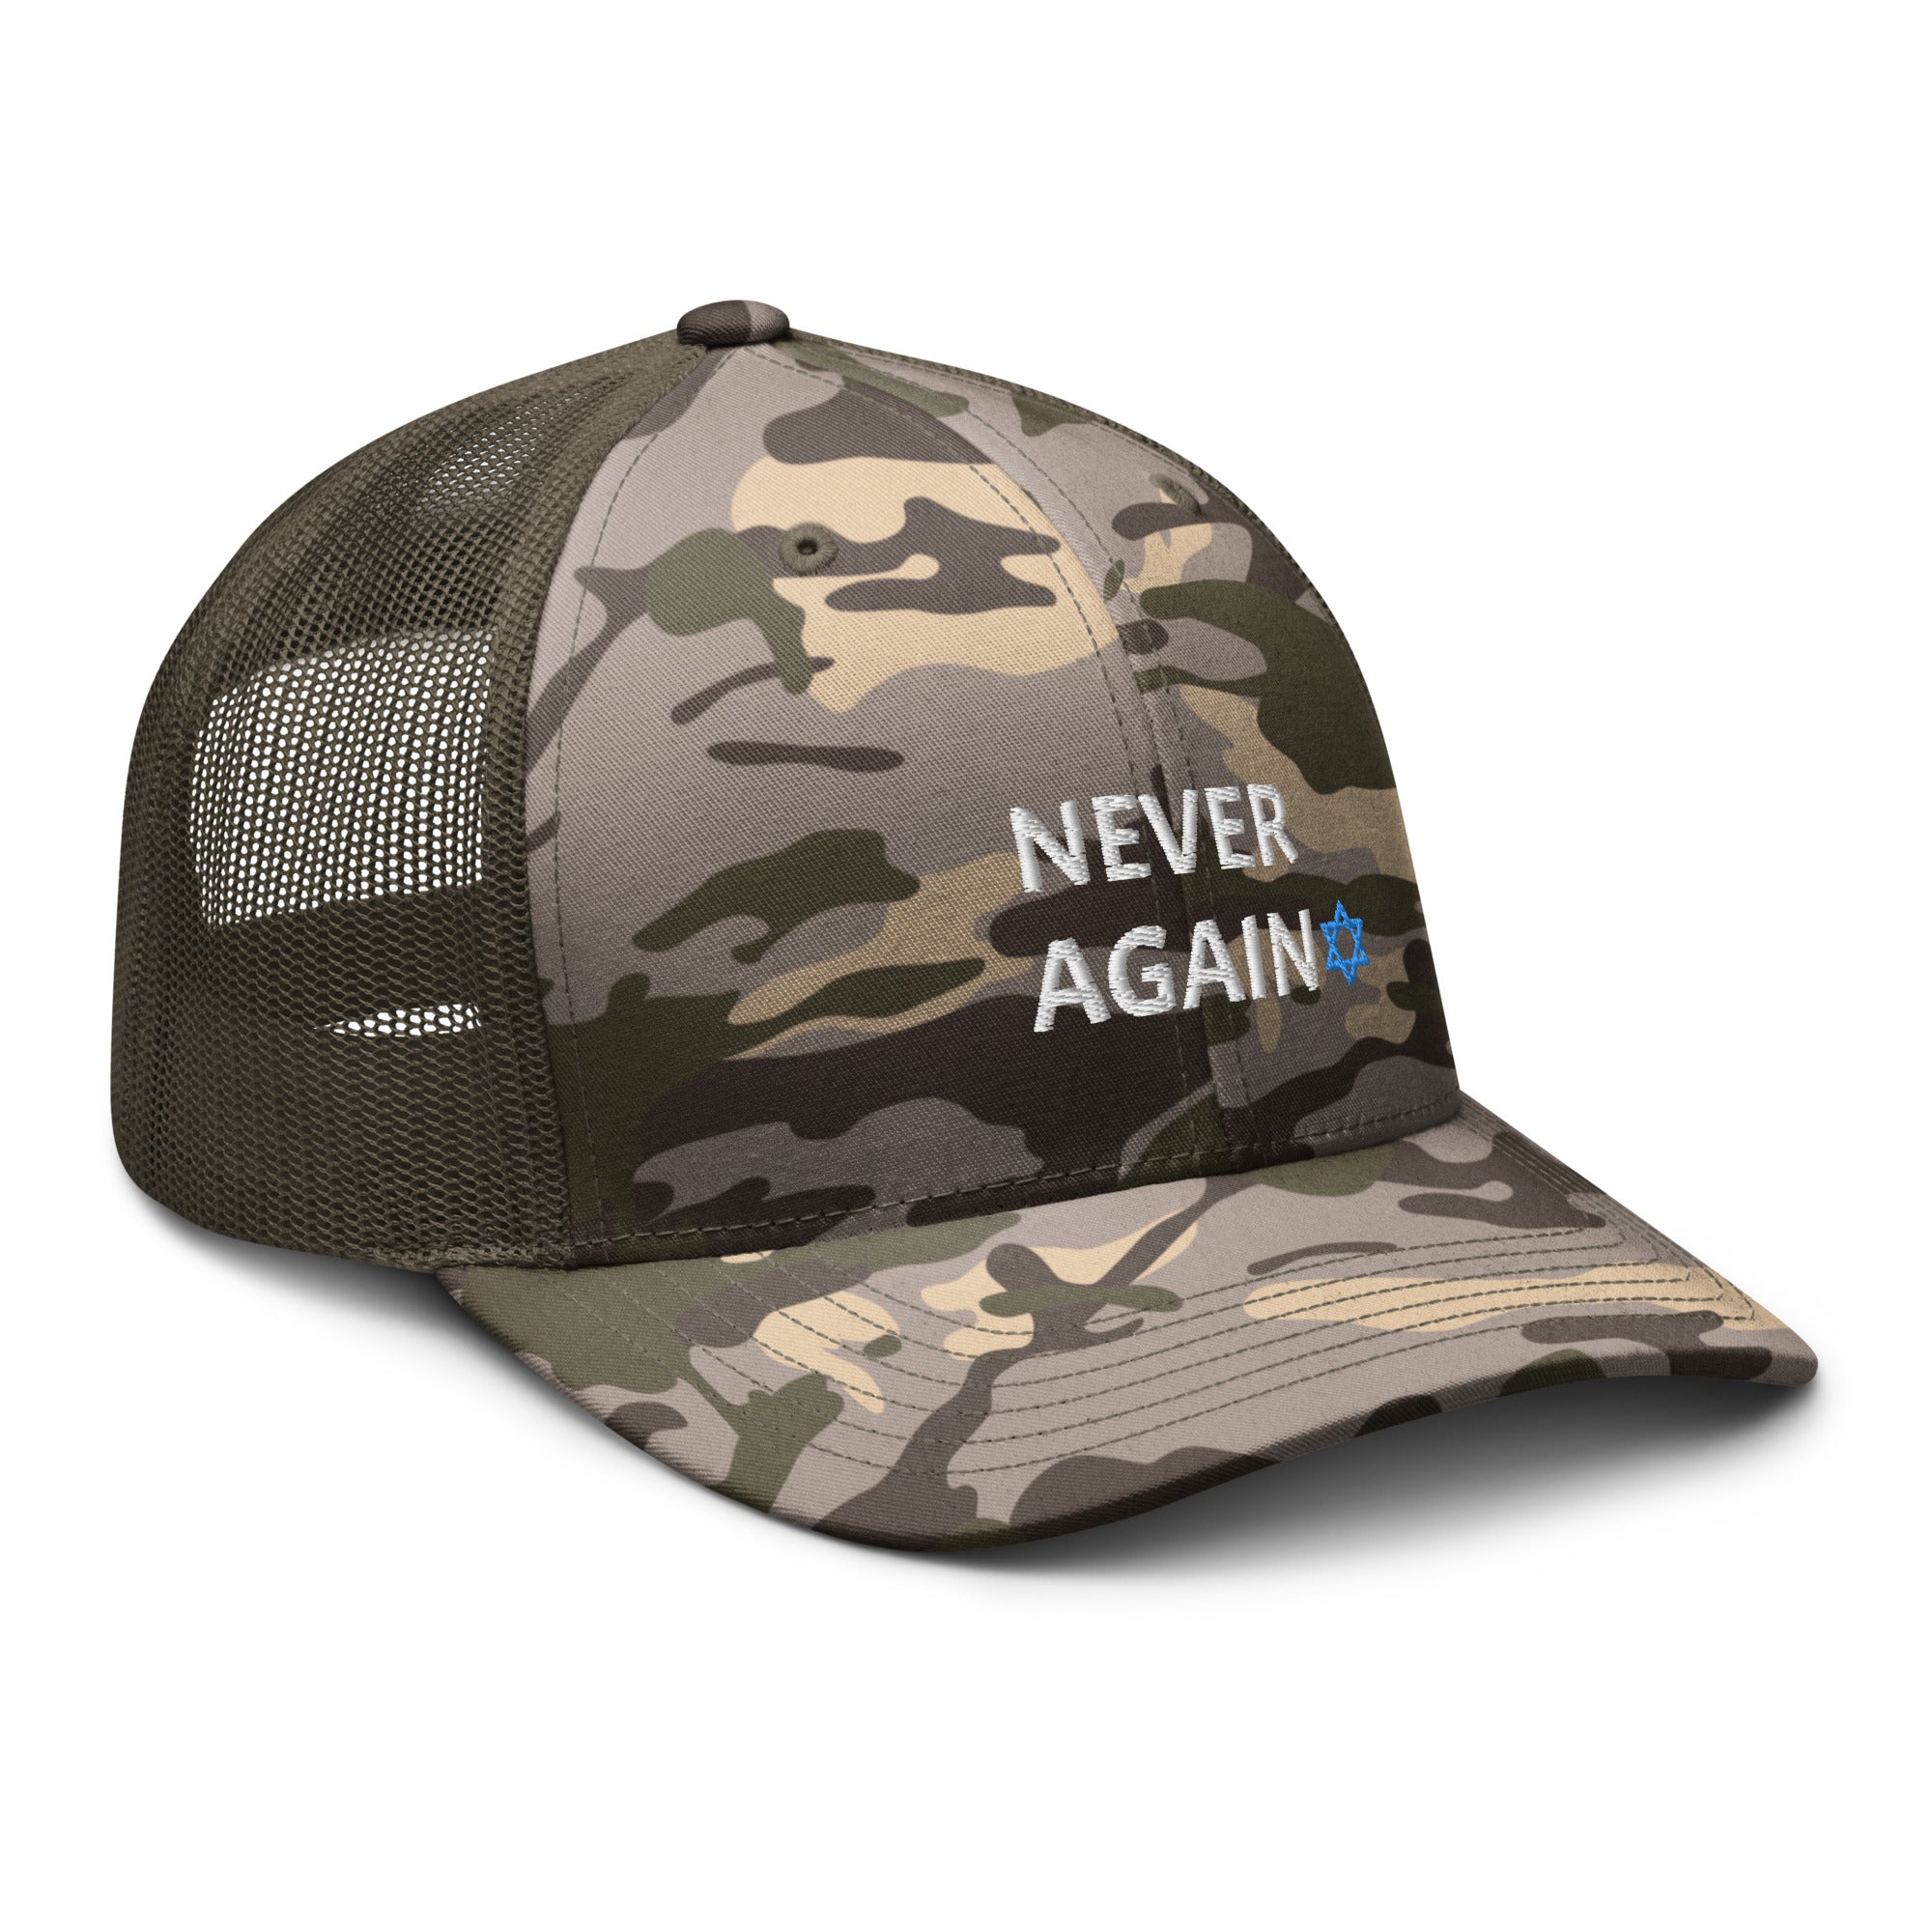 Never Again - Camouflage trucker hat